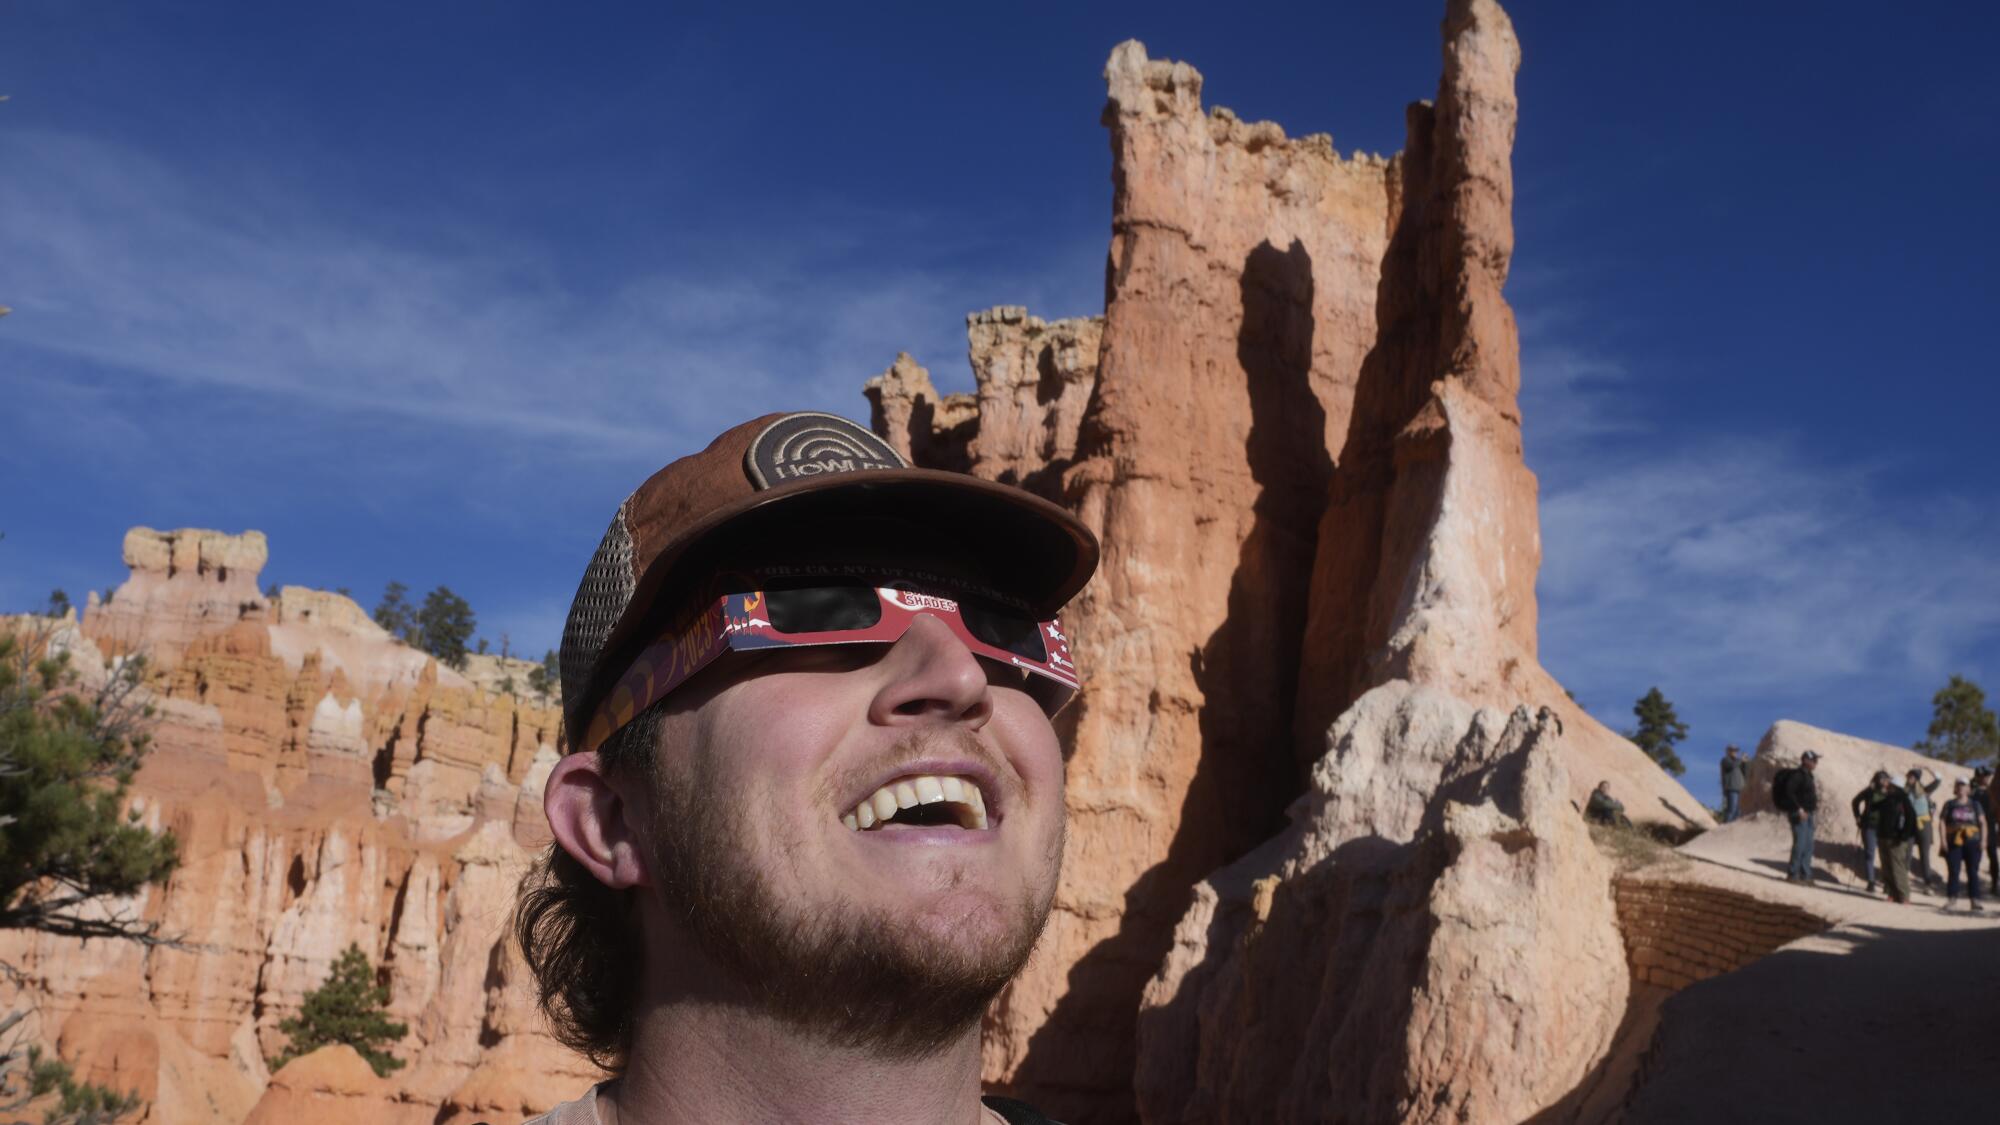 A person wearing special glasses watched an eclipse while standing in front of rock formations.